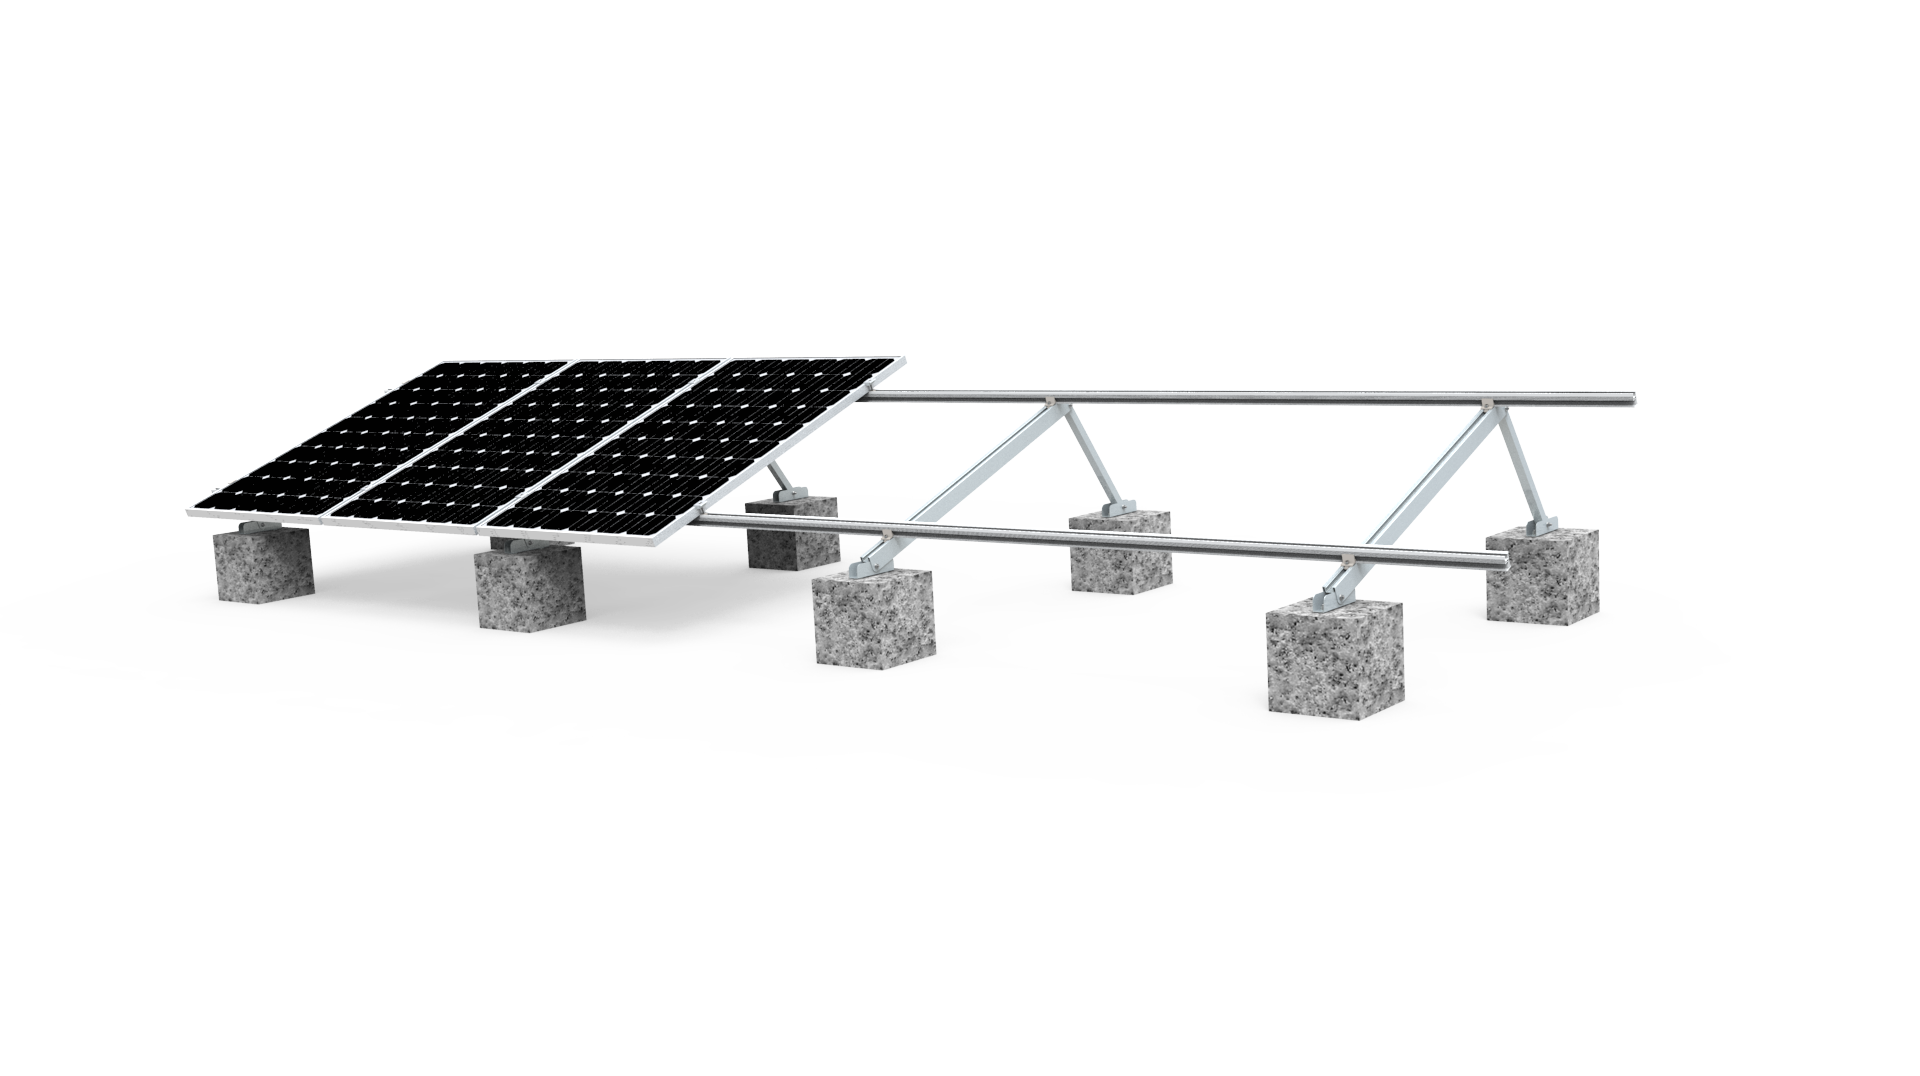 Do you know the installation method of such flat roof photovoltaic brackets?